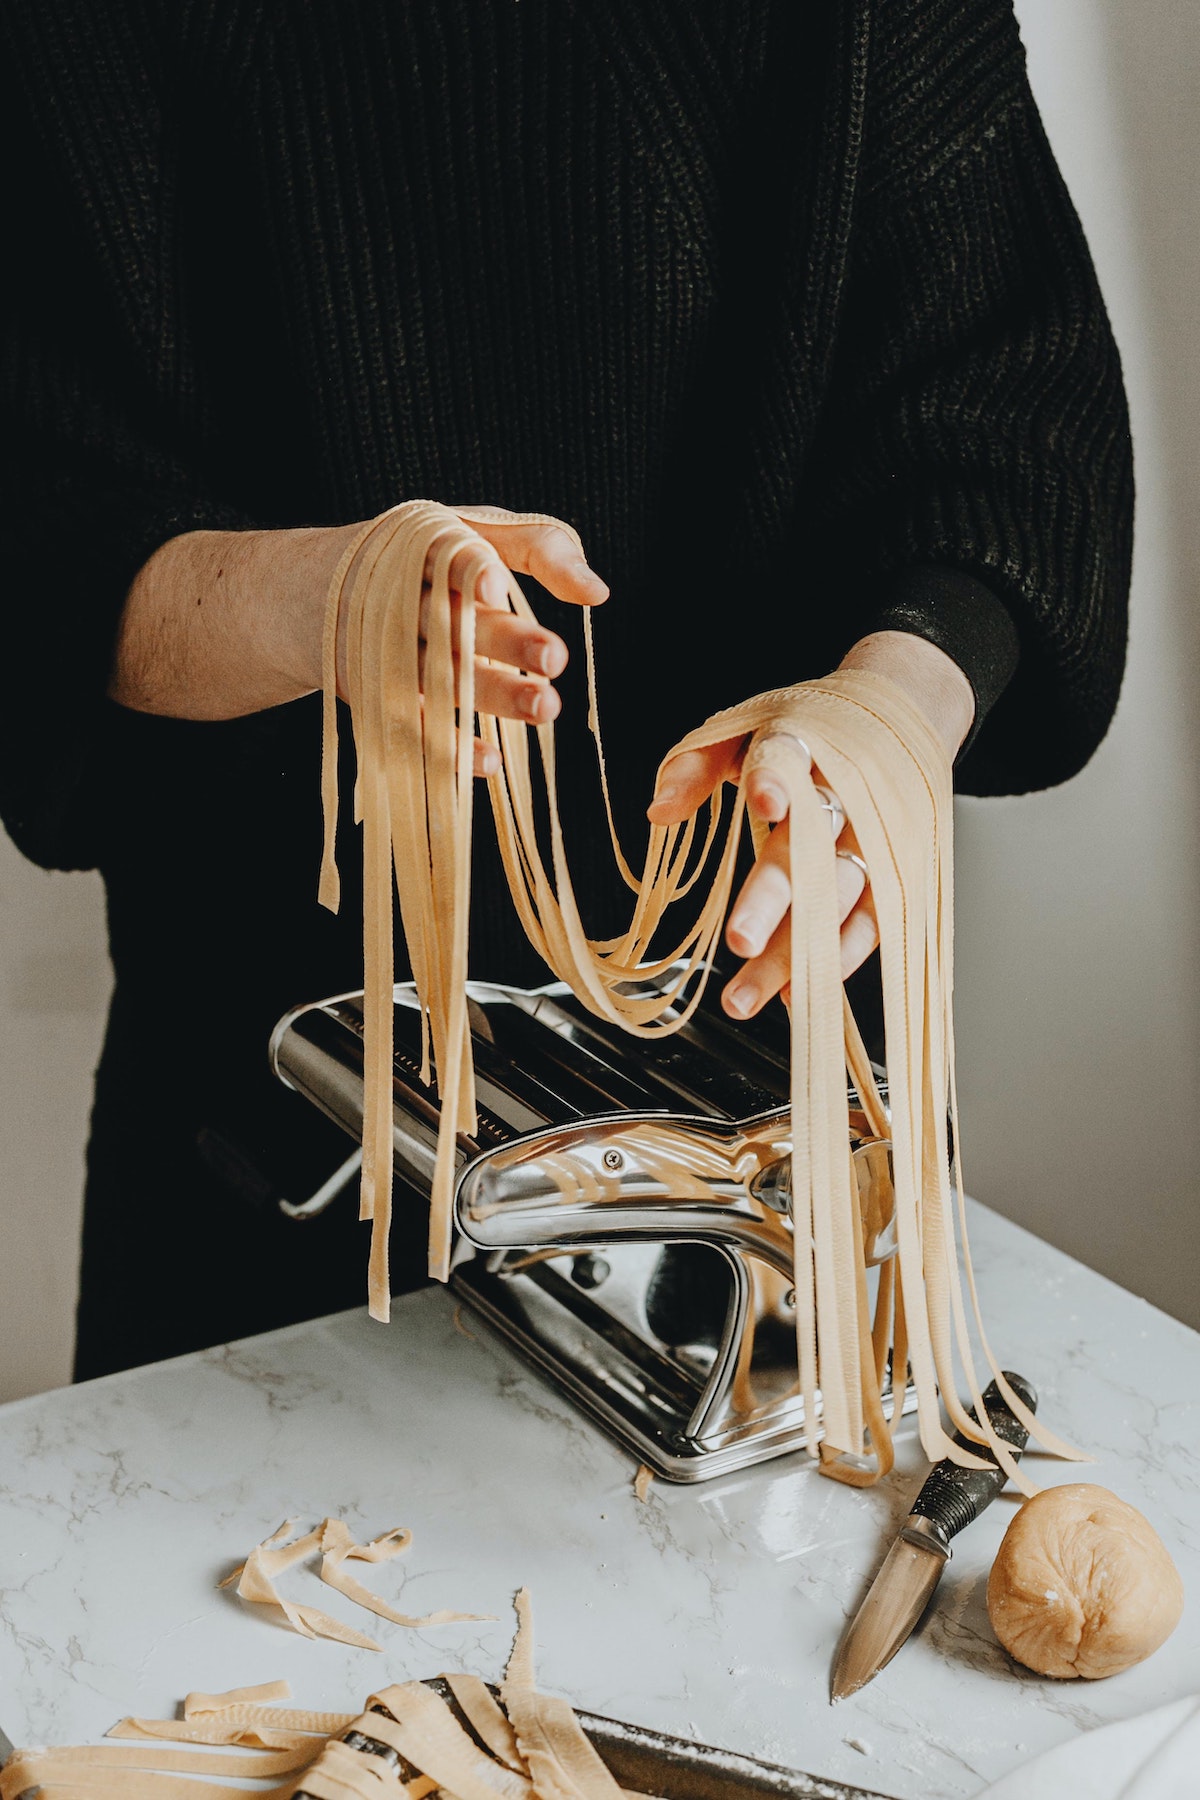 A person wearing a black shirt holding homemade fresh fettuccine noodles